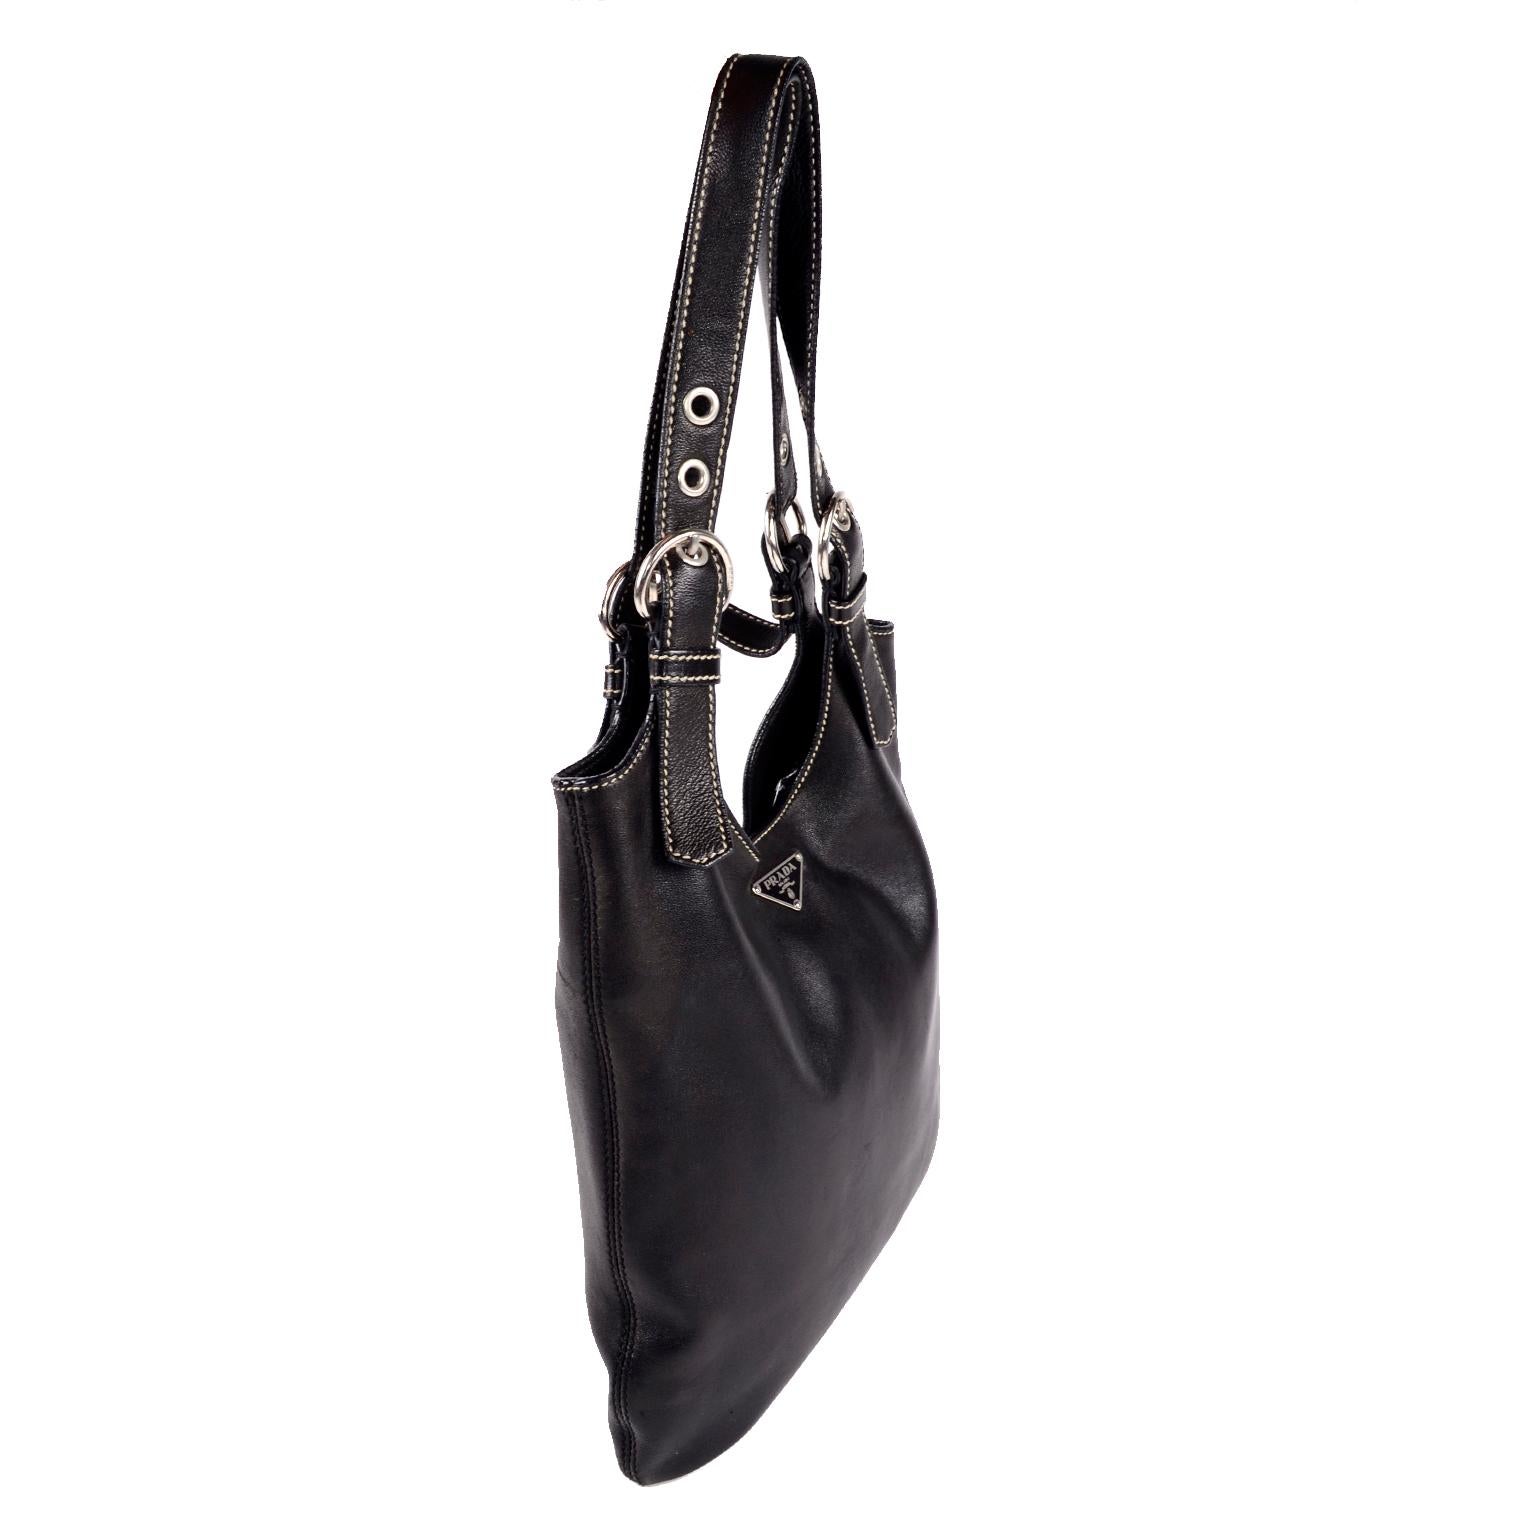 This is an incredibly soft, buttery black lambskin Prada hobo bag with silver hardware and the iconic Prada triangle nameplate.  The bag has white contrast stitching and Prada monogram lining.  This top handle bag has an interior side